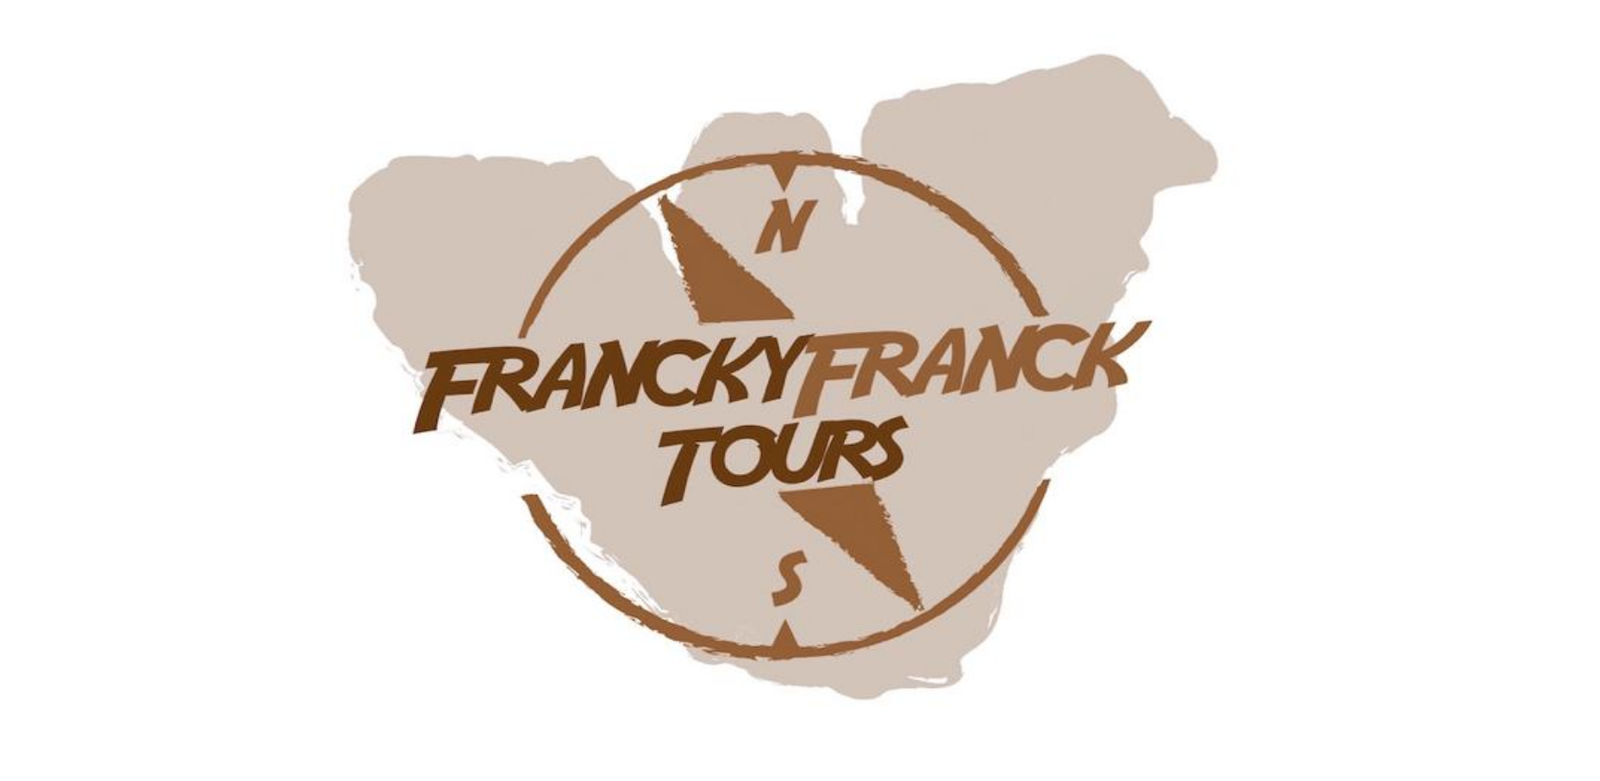 You are currently viewing Franckyfranck Moorea Tours